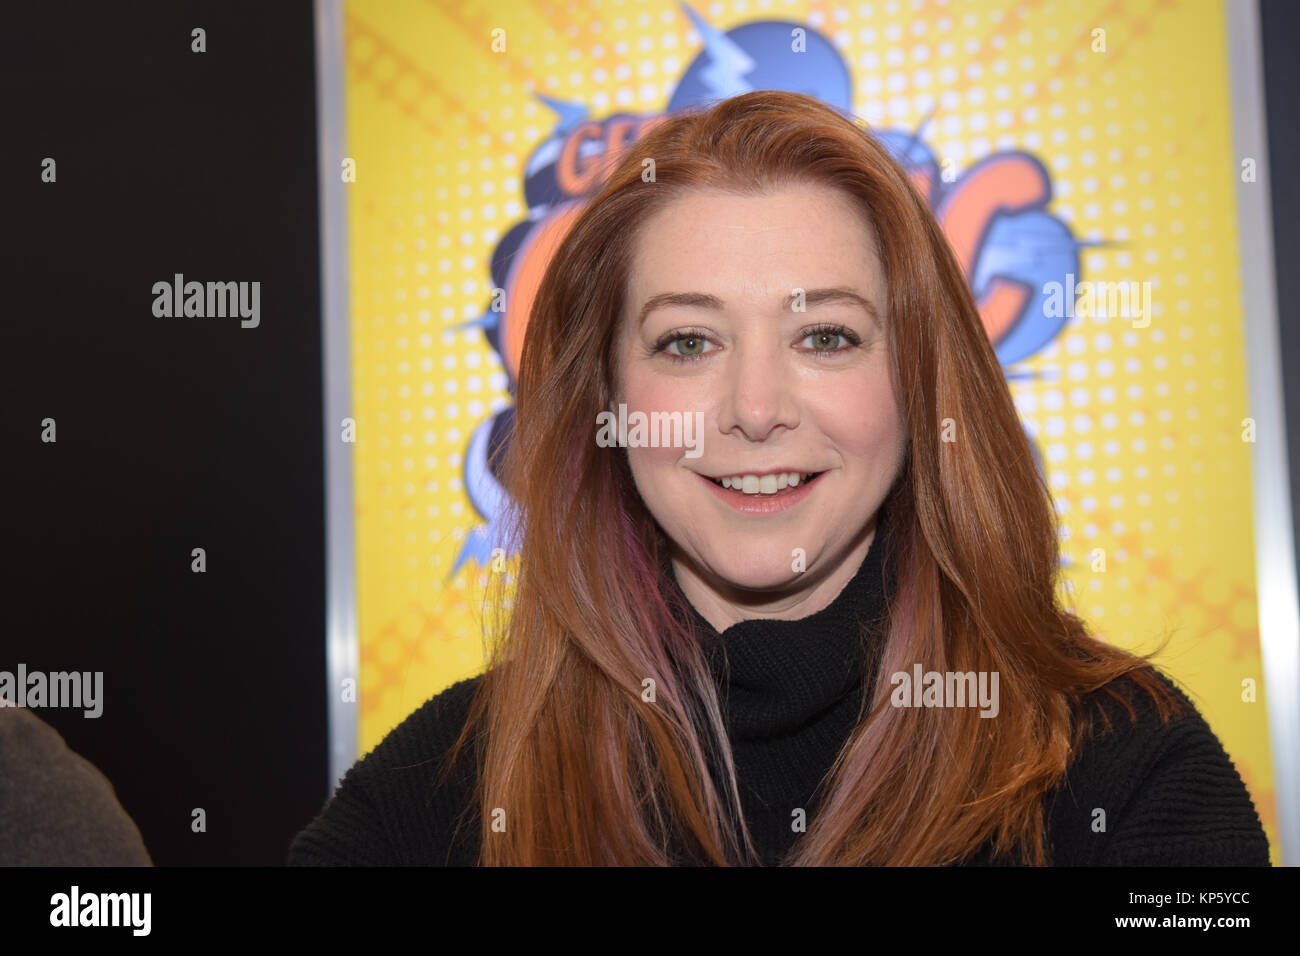 Dortmund, Germany - December 9th 2017: US Actress Alyson Hannigan (* 1974, Buffy The Vampire Slayer, Angel, How I Met Your Mother, American Pie) Stock Photo